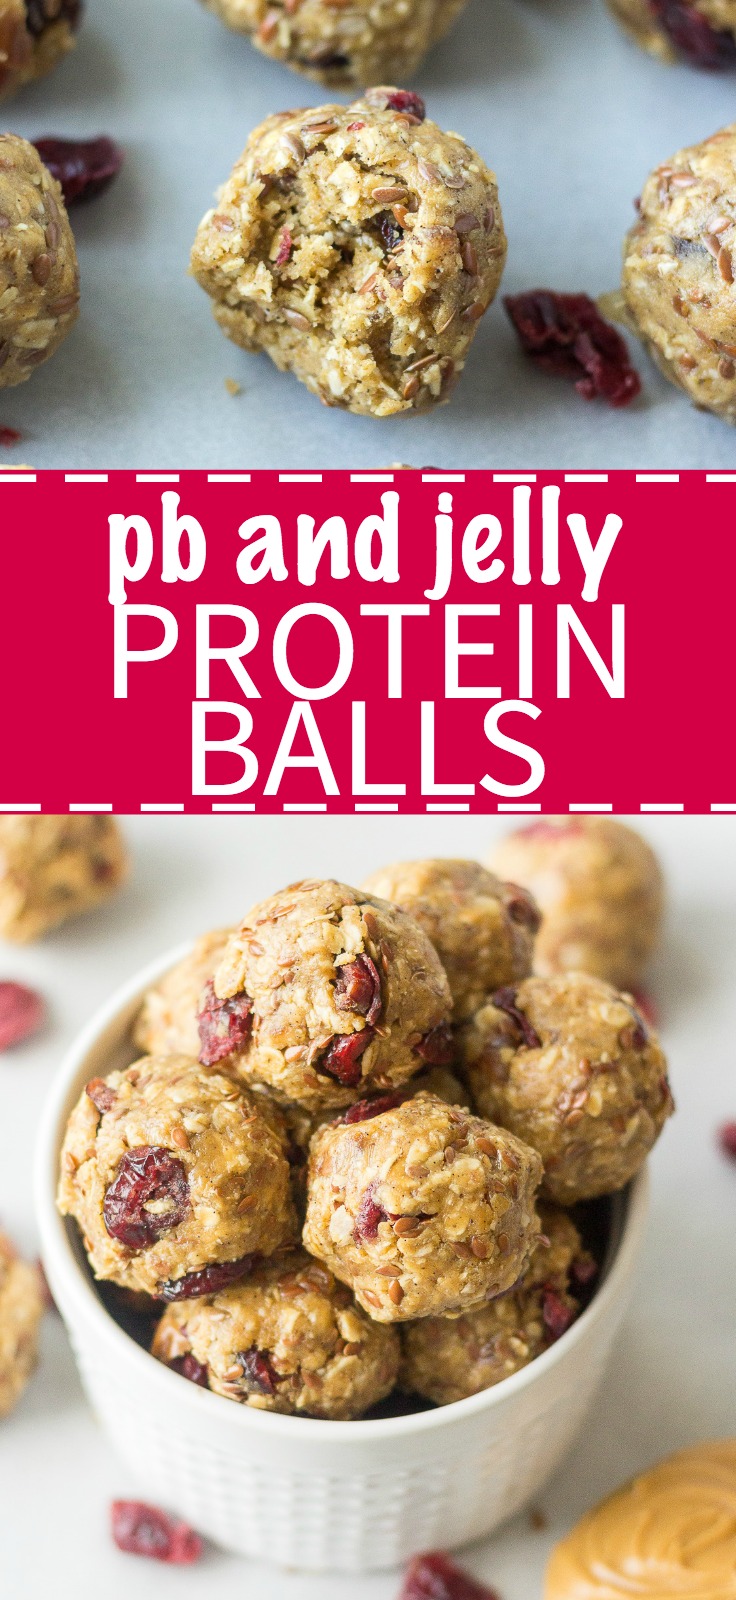 These PB & J Protein Balls are going to be your new favorite bite-sized snack! They're made with all healthy ingredients and packed with protein for a filling snack on-the-go.